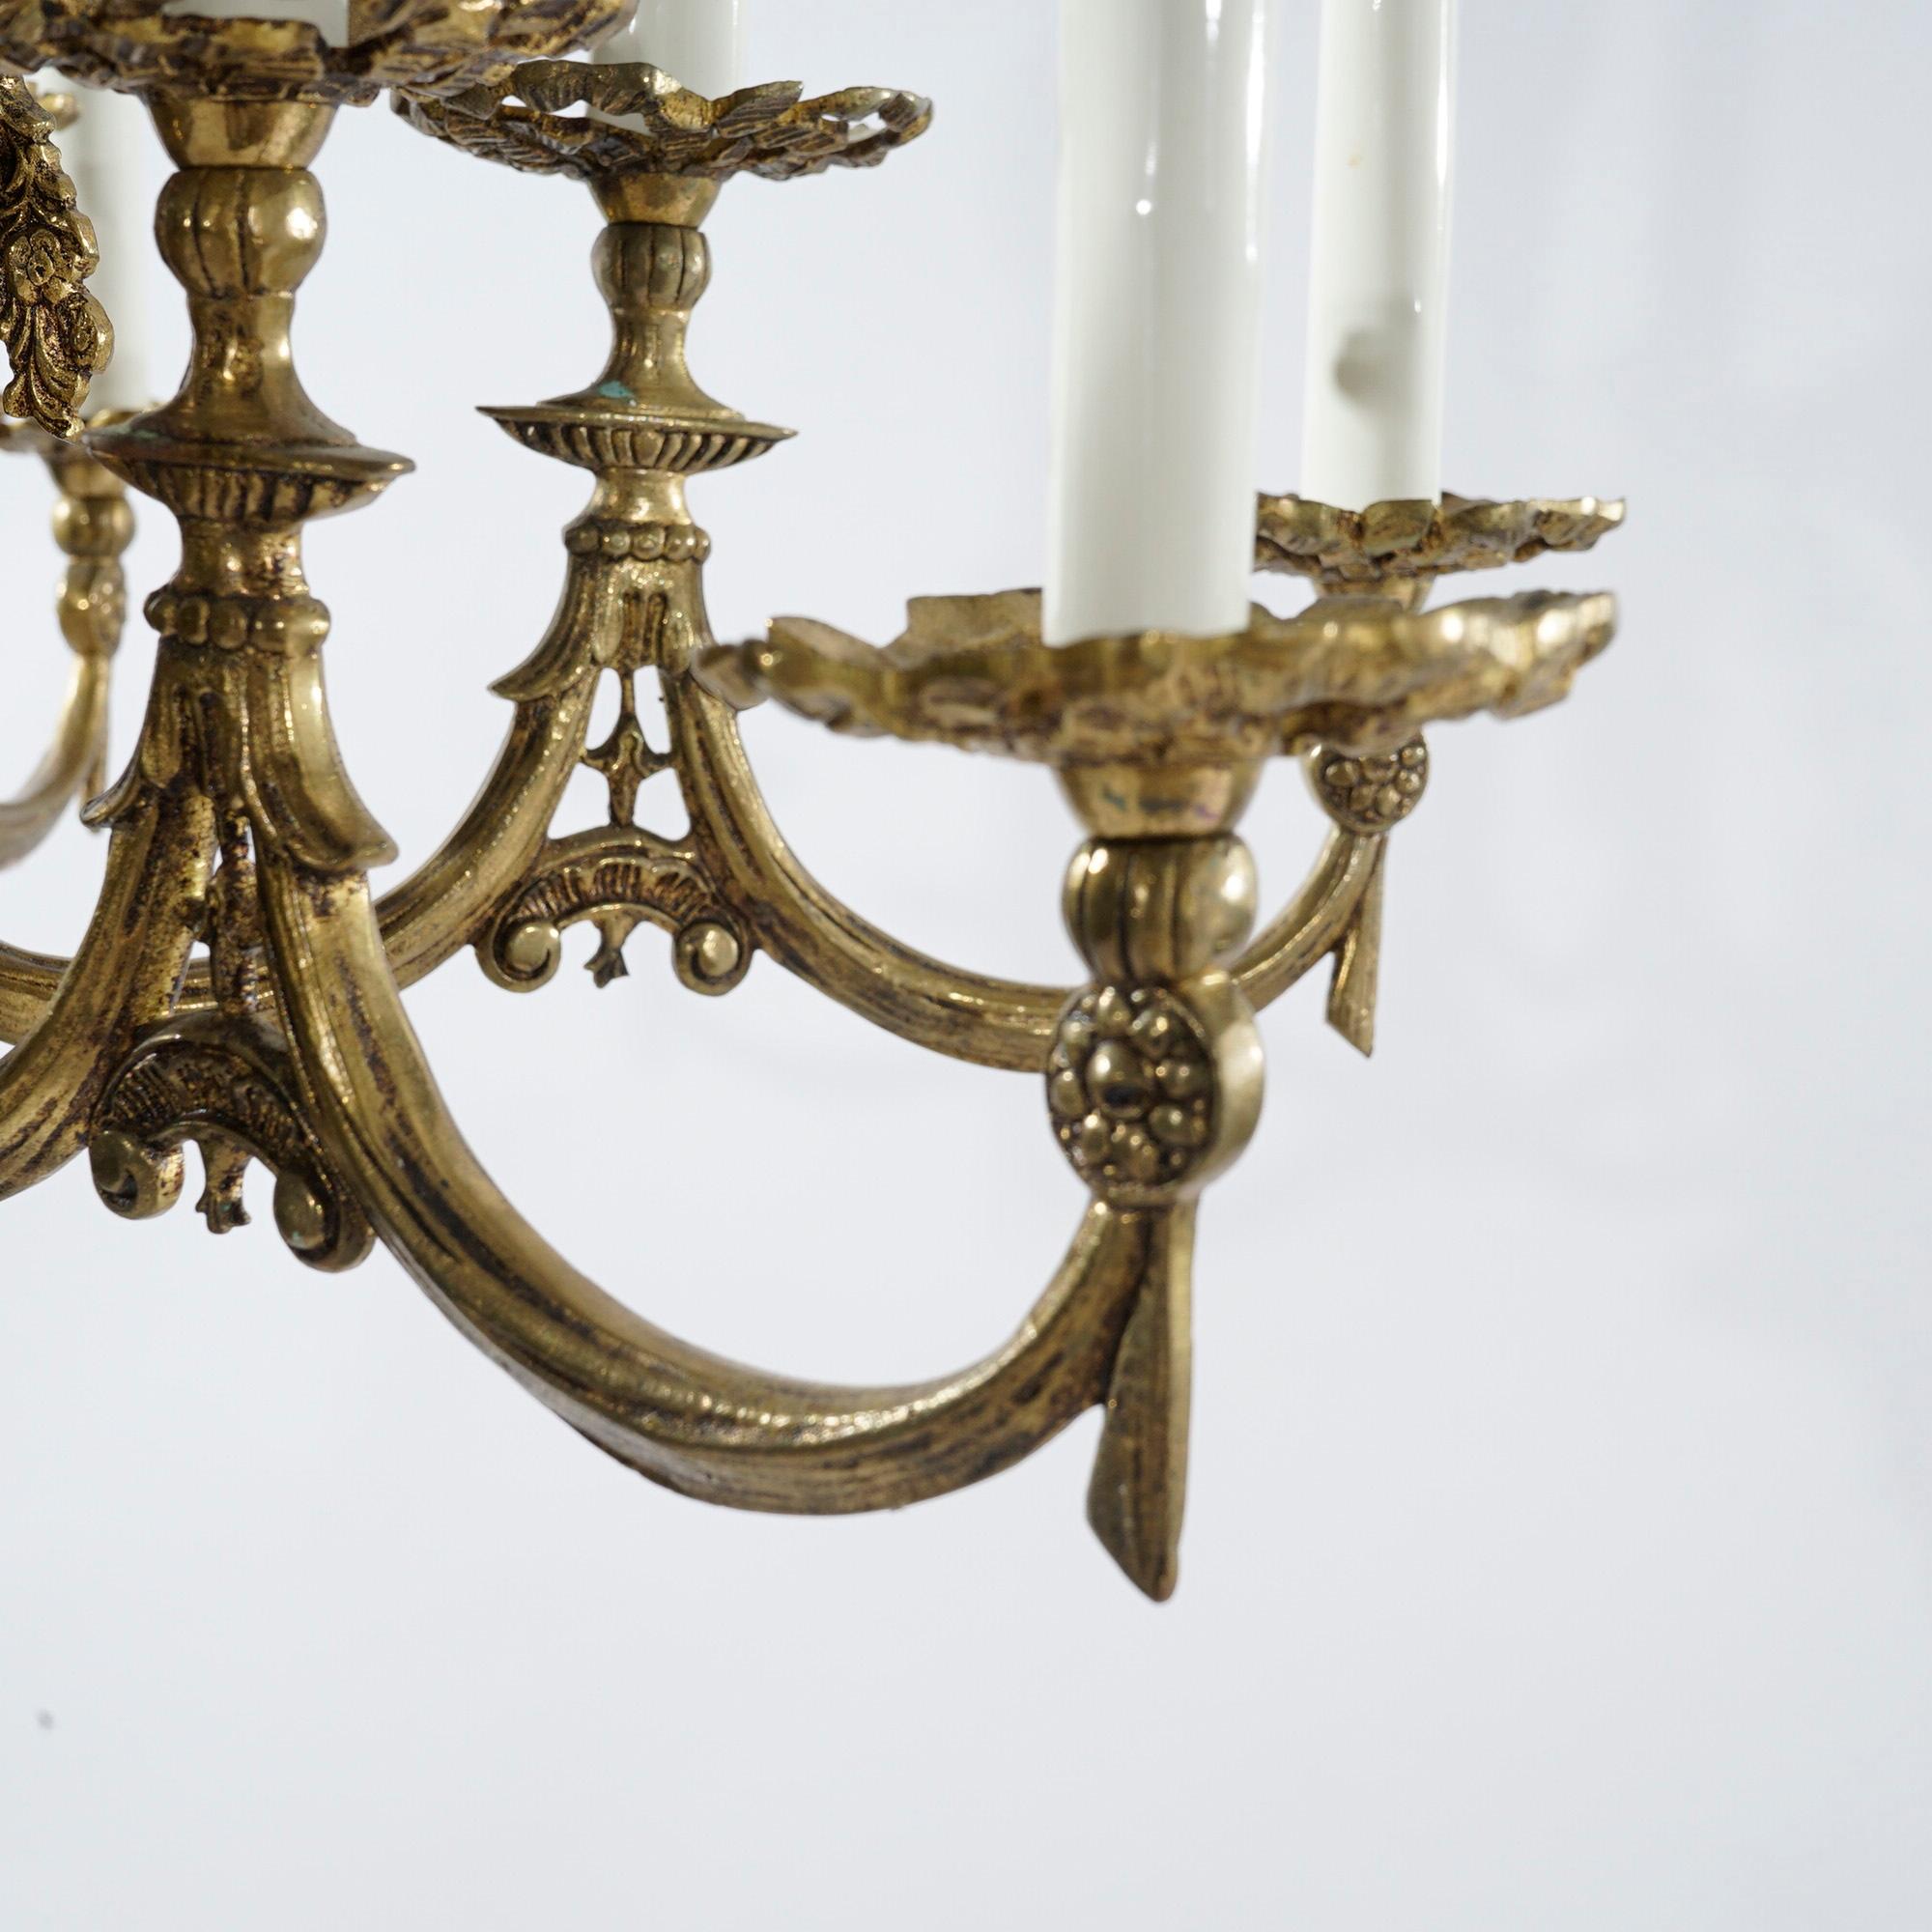 Antique French Empire Style Ebonized Bronze Twelve-Light Chandelier, Early 20thC For Sale 8